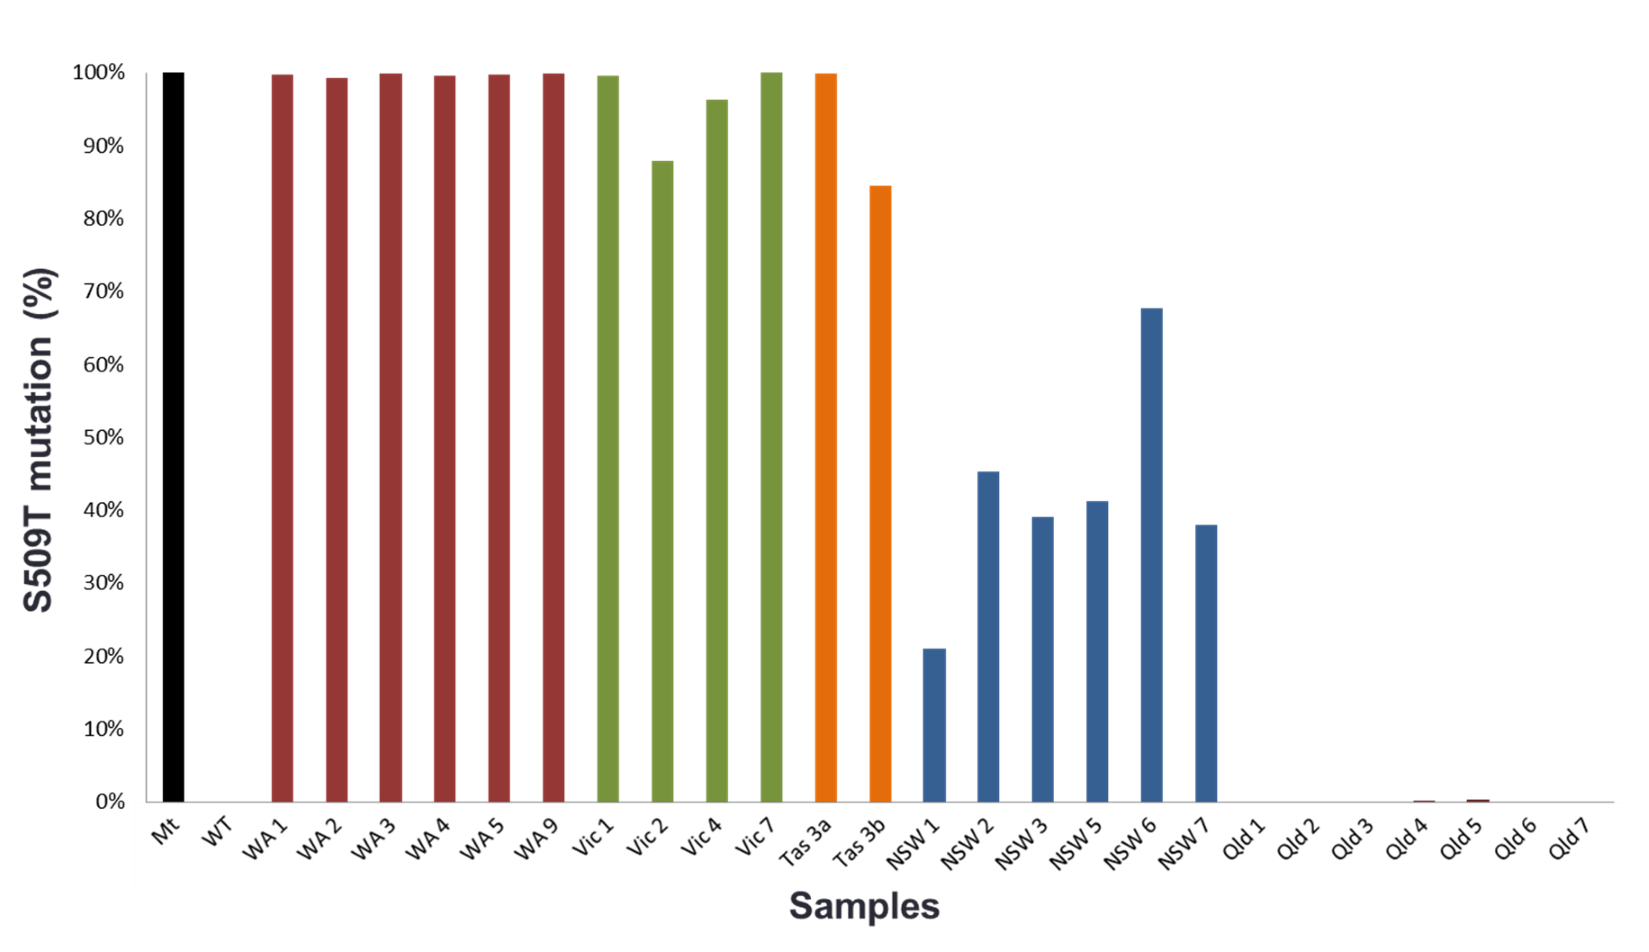 Figure 1. Mutation rates in barley powdery mildew samples quantified by digital PCR in 2016 in Western Australia, Victoria, Tasmania, New South Wales and Queensland. Samples were obtained from barley bait trails specifically developed to catch resistant strains.